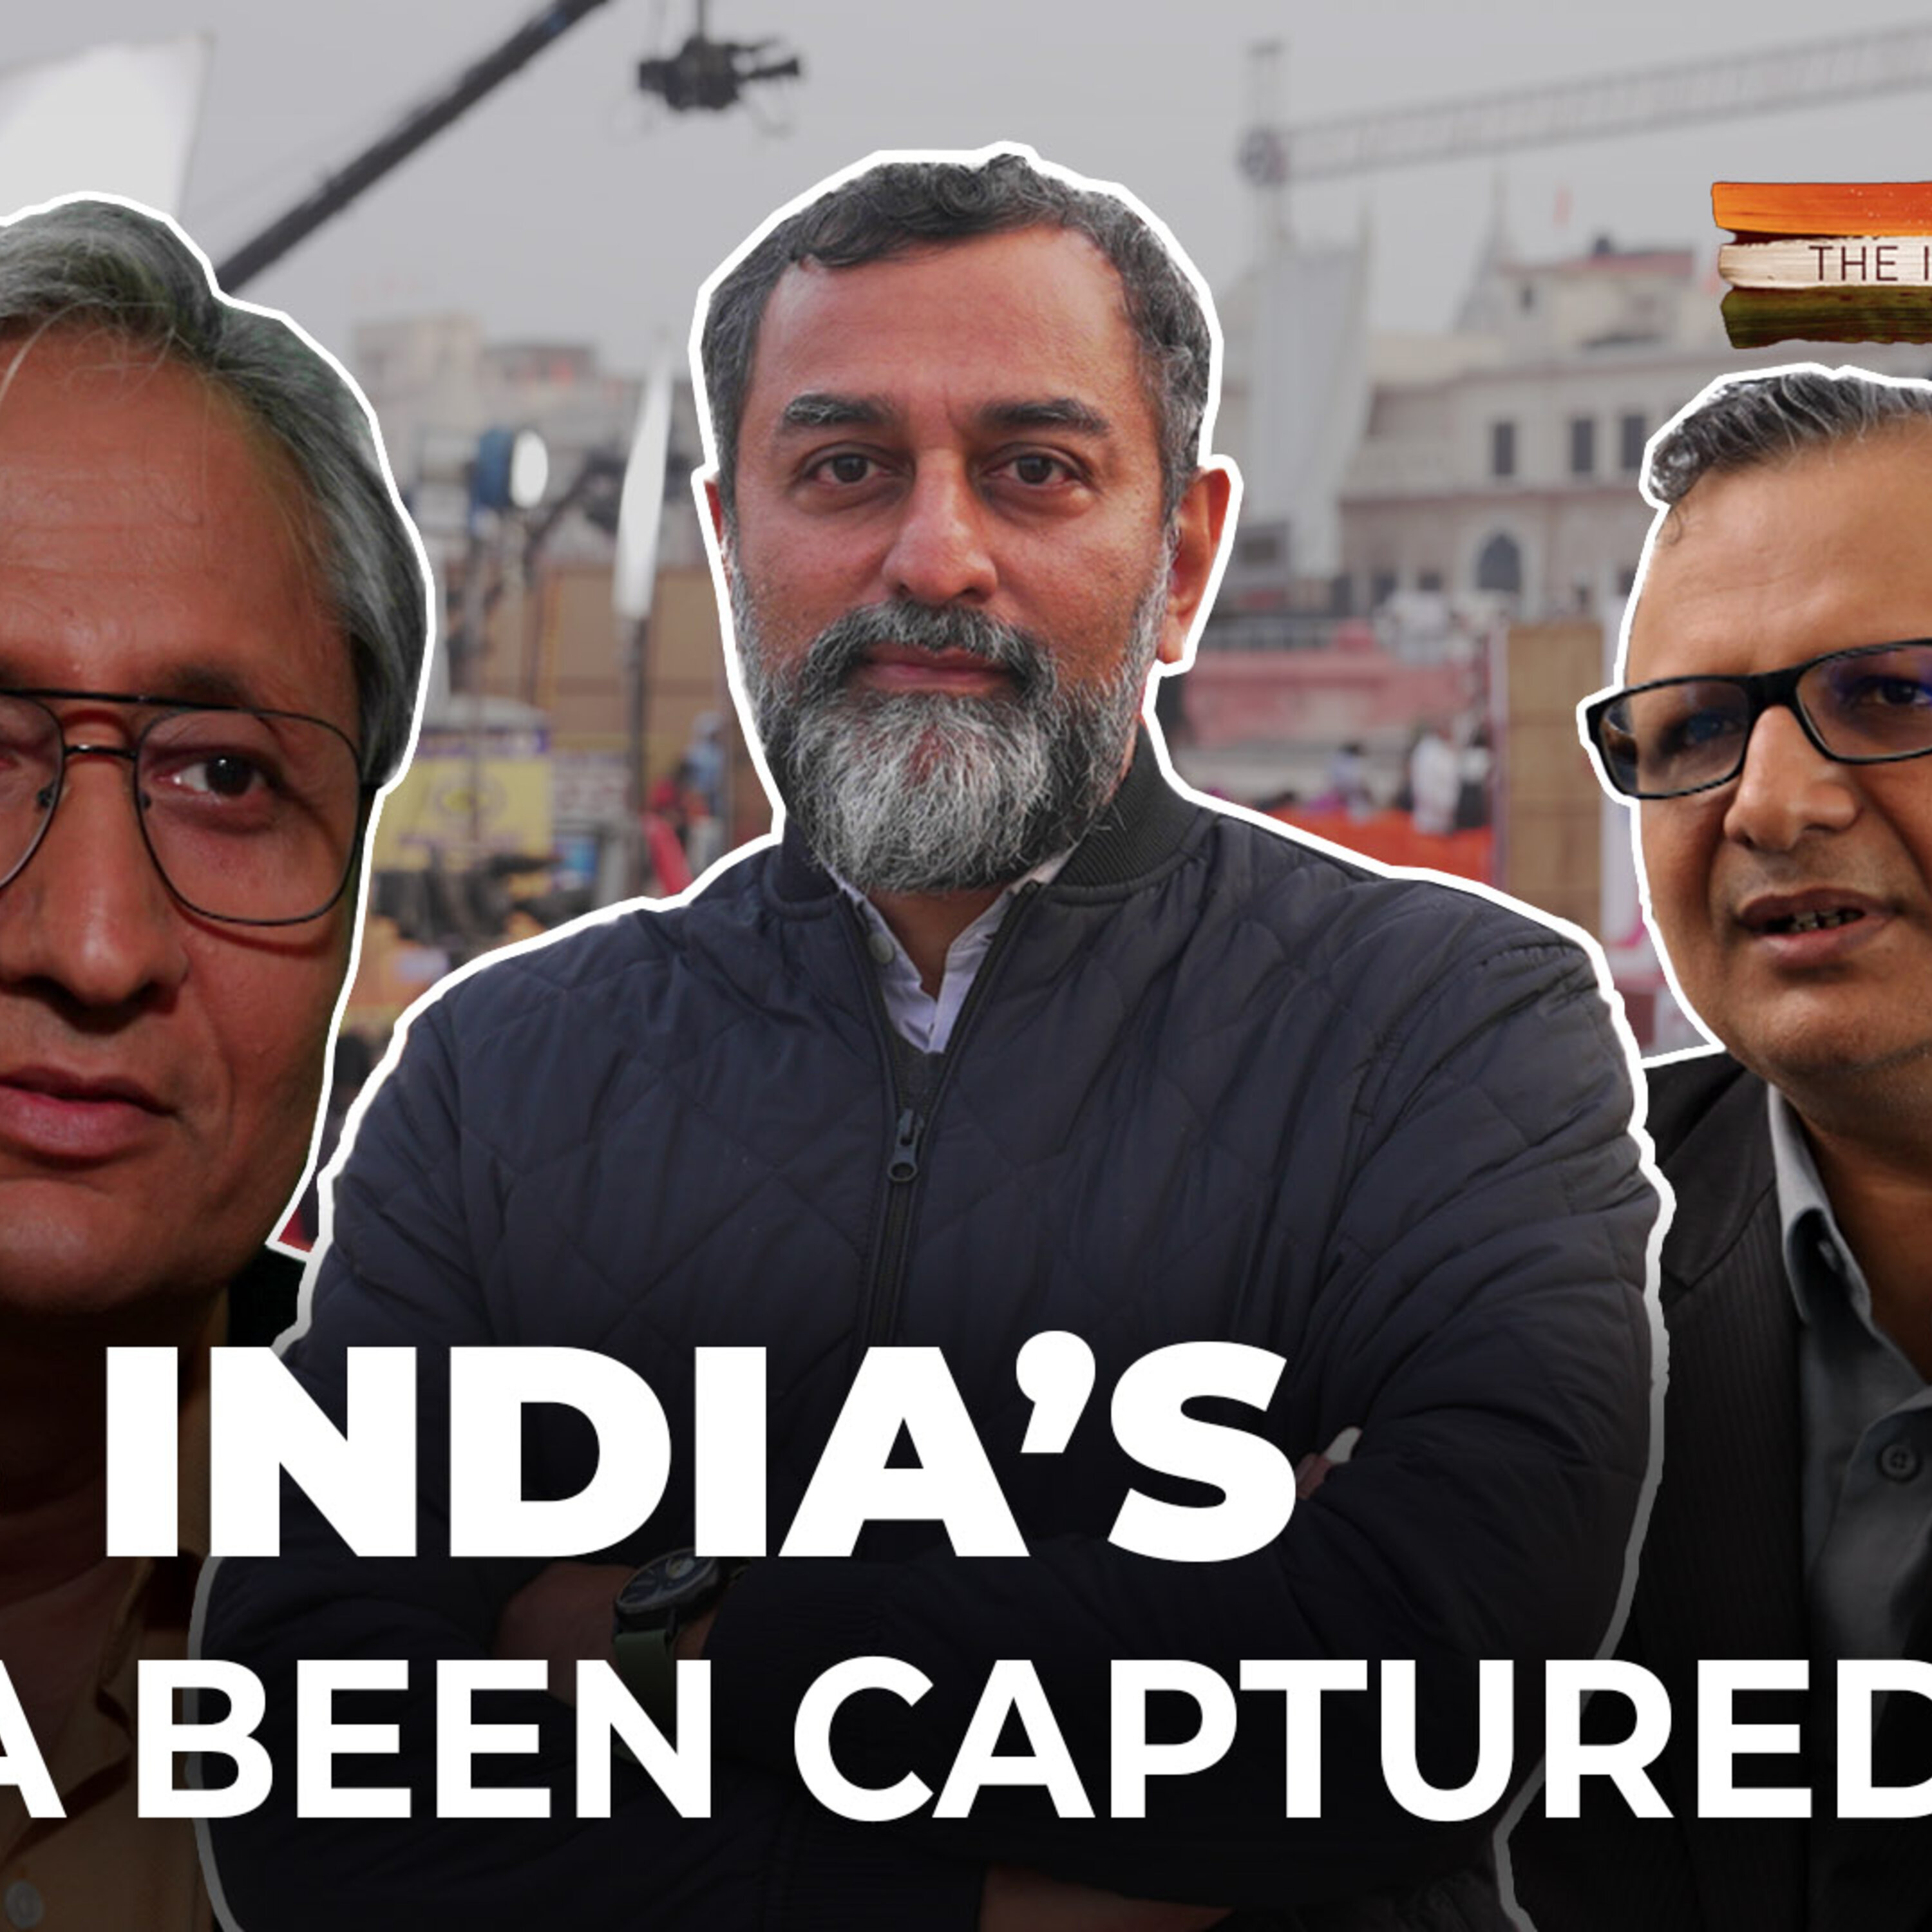 India's elections are coming up...are the media up to the task? | The India Report